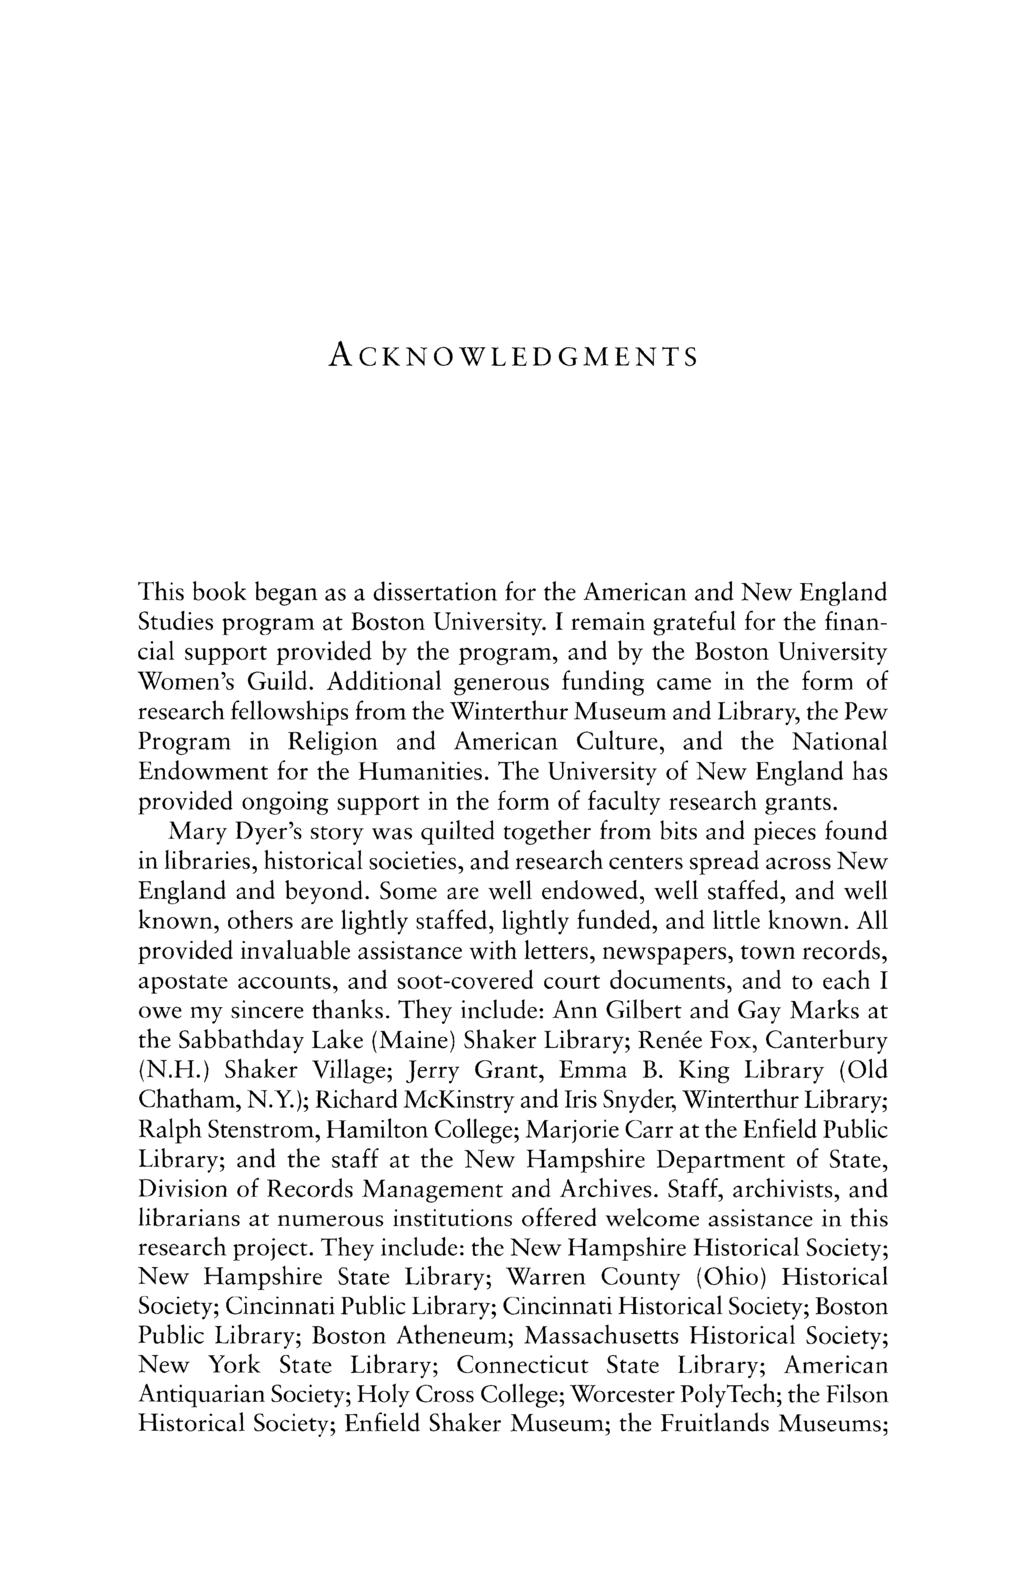 ACKNOWLEDGMENTS This book began as a dissertation for the American and New England Studies program at Boston University.